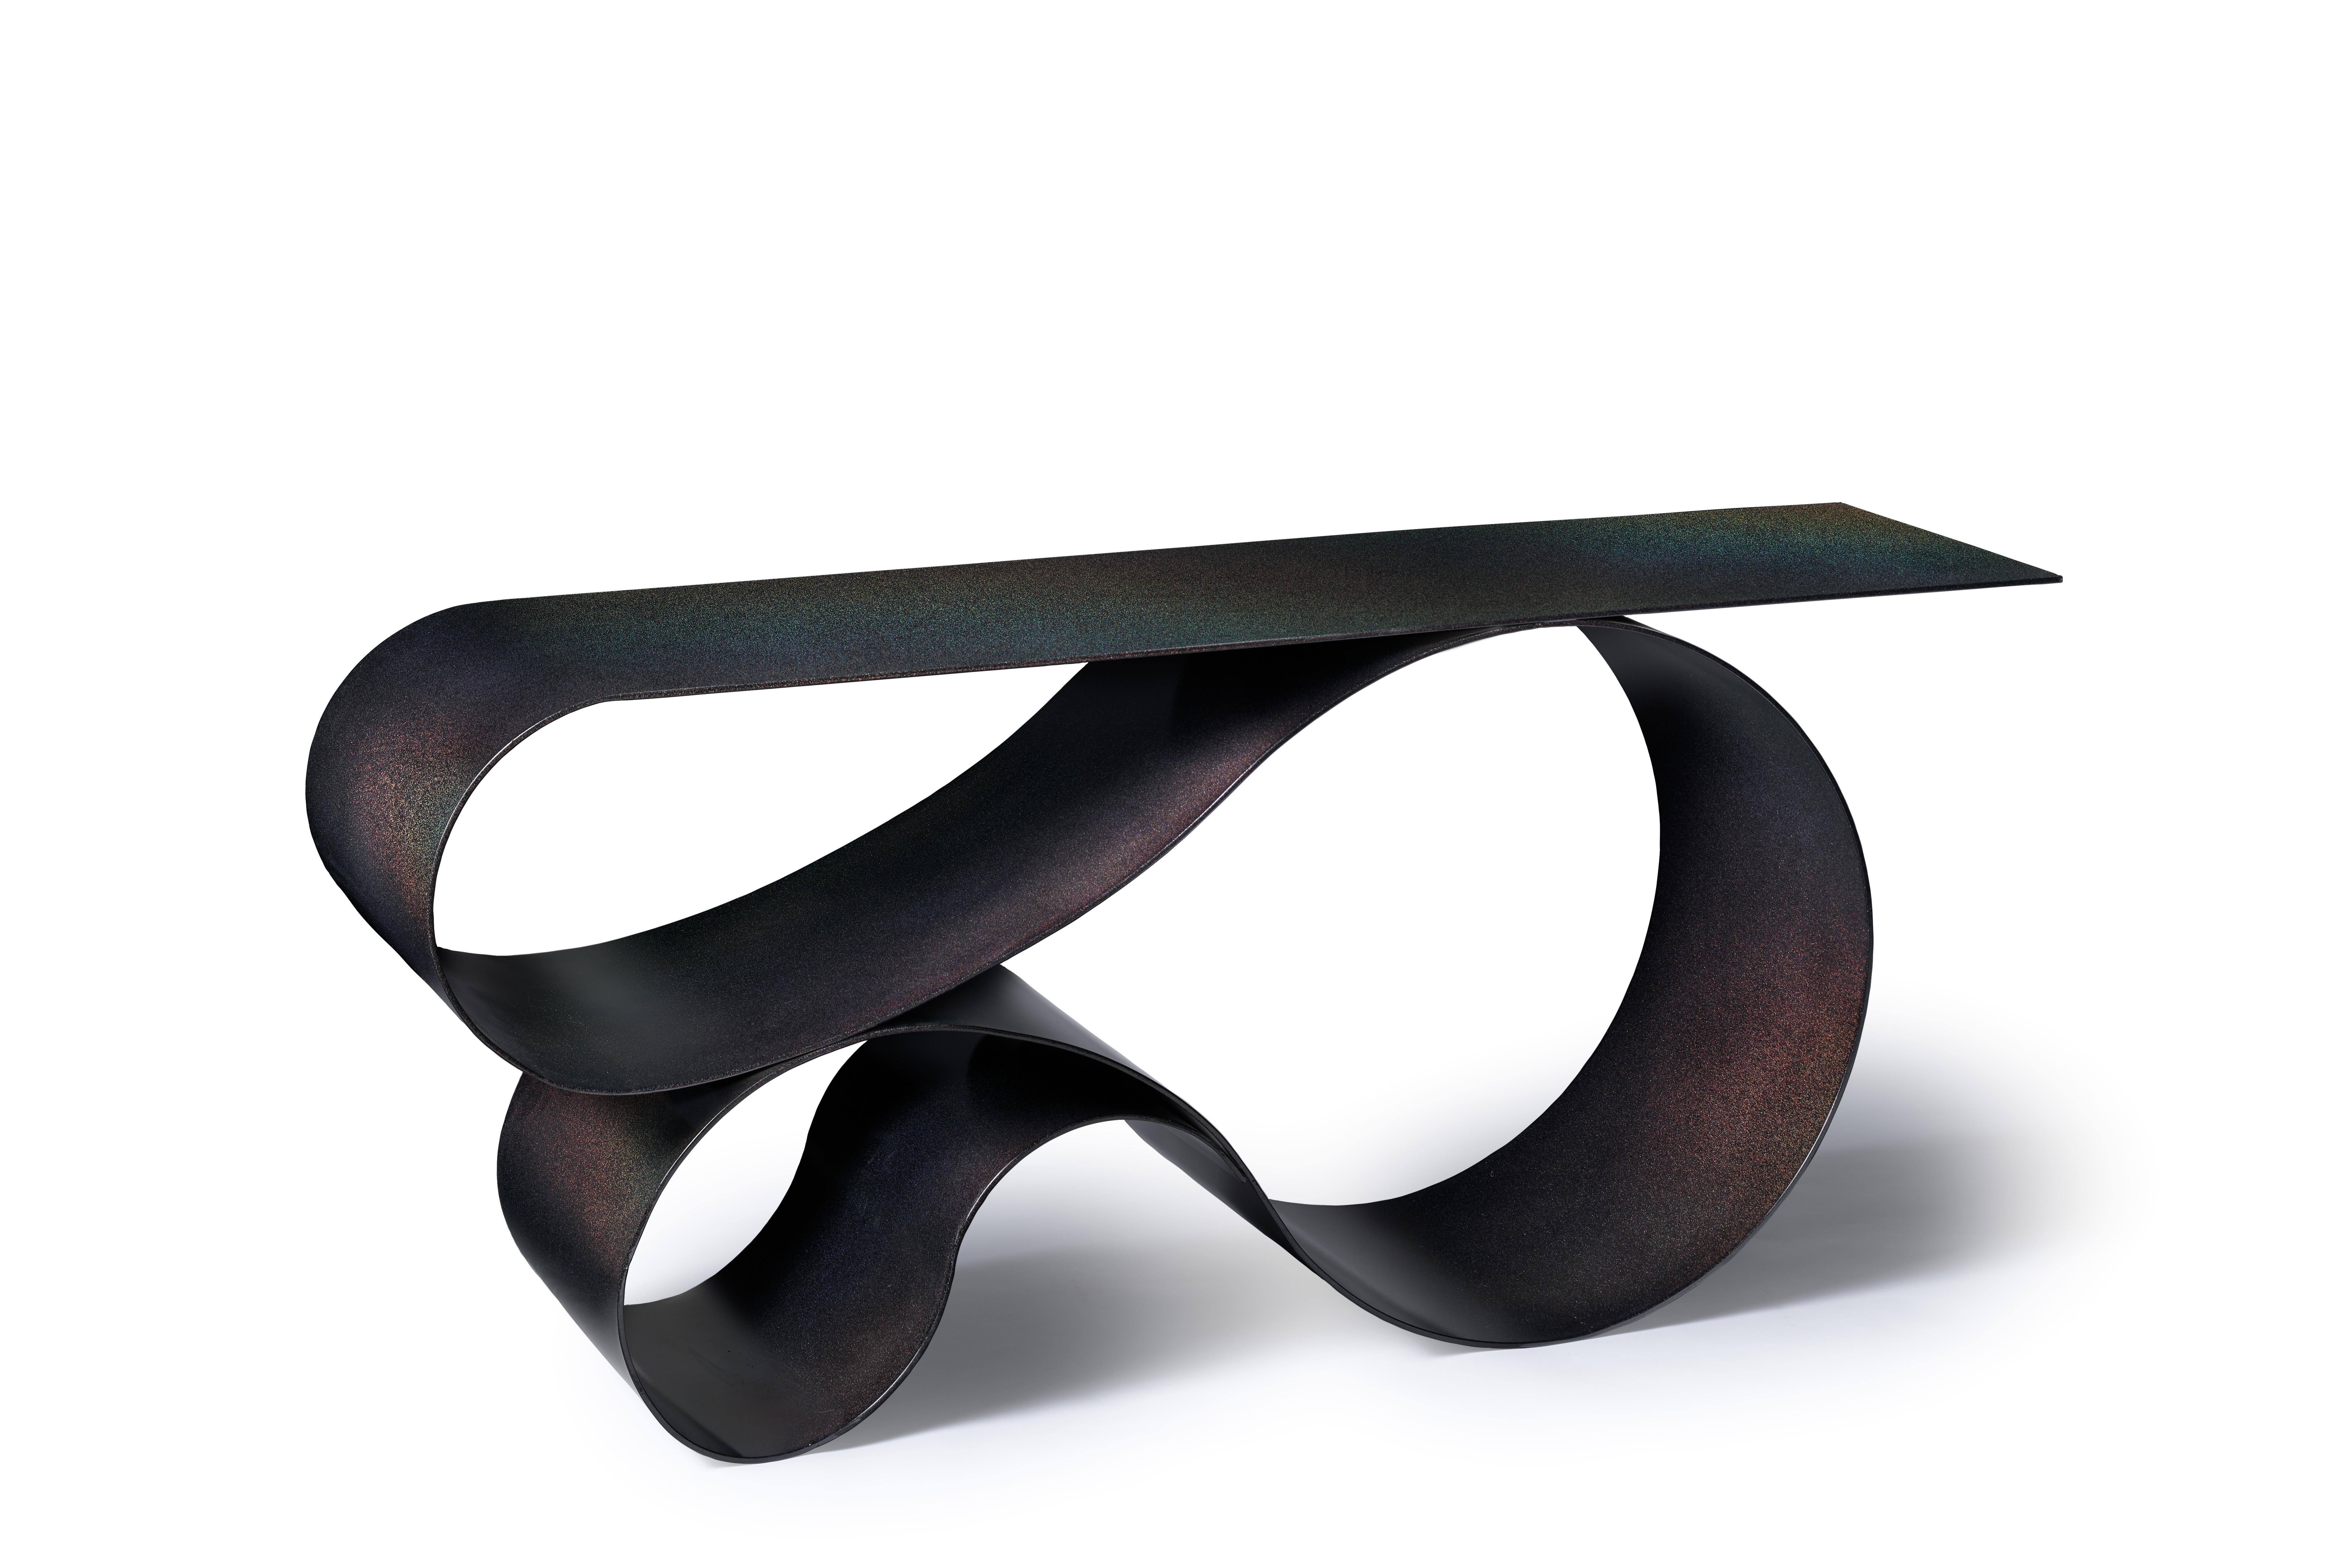 The iconic lyrical form of the award winning Whorl Table series this time executed in powder coated aluminum. 1/4